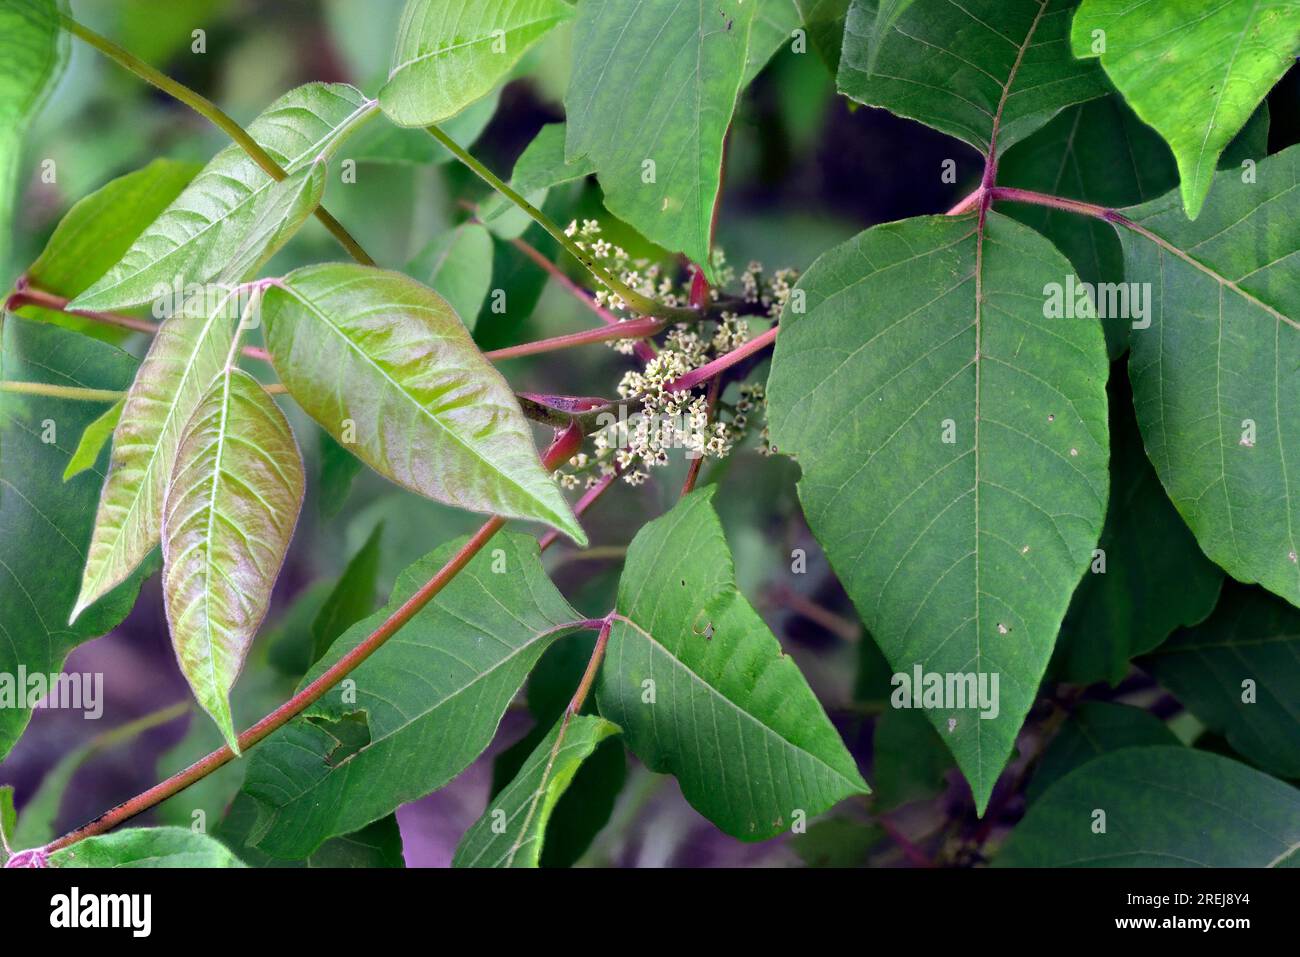 Poison Ivy (Toxicodendron radicans) in full bloom. A common toxic plant that causes skin rash can be identified by three leaf leaflets. Stock Photo